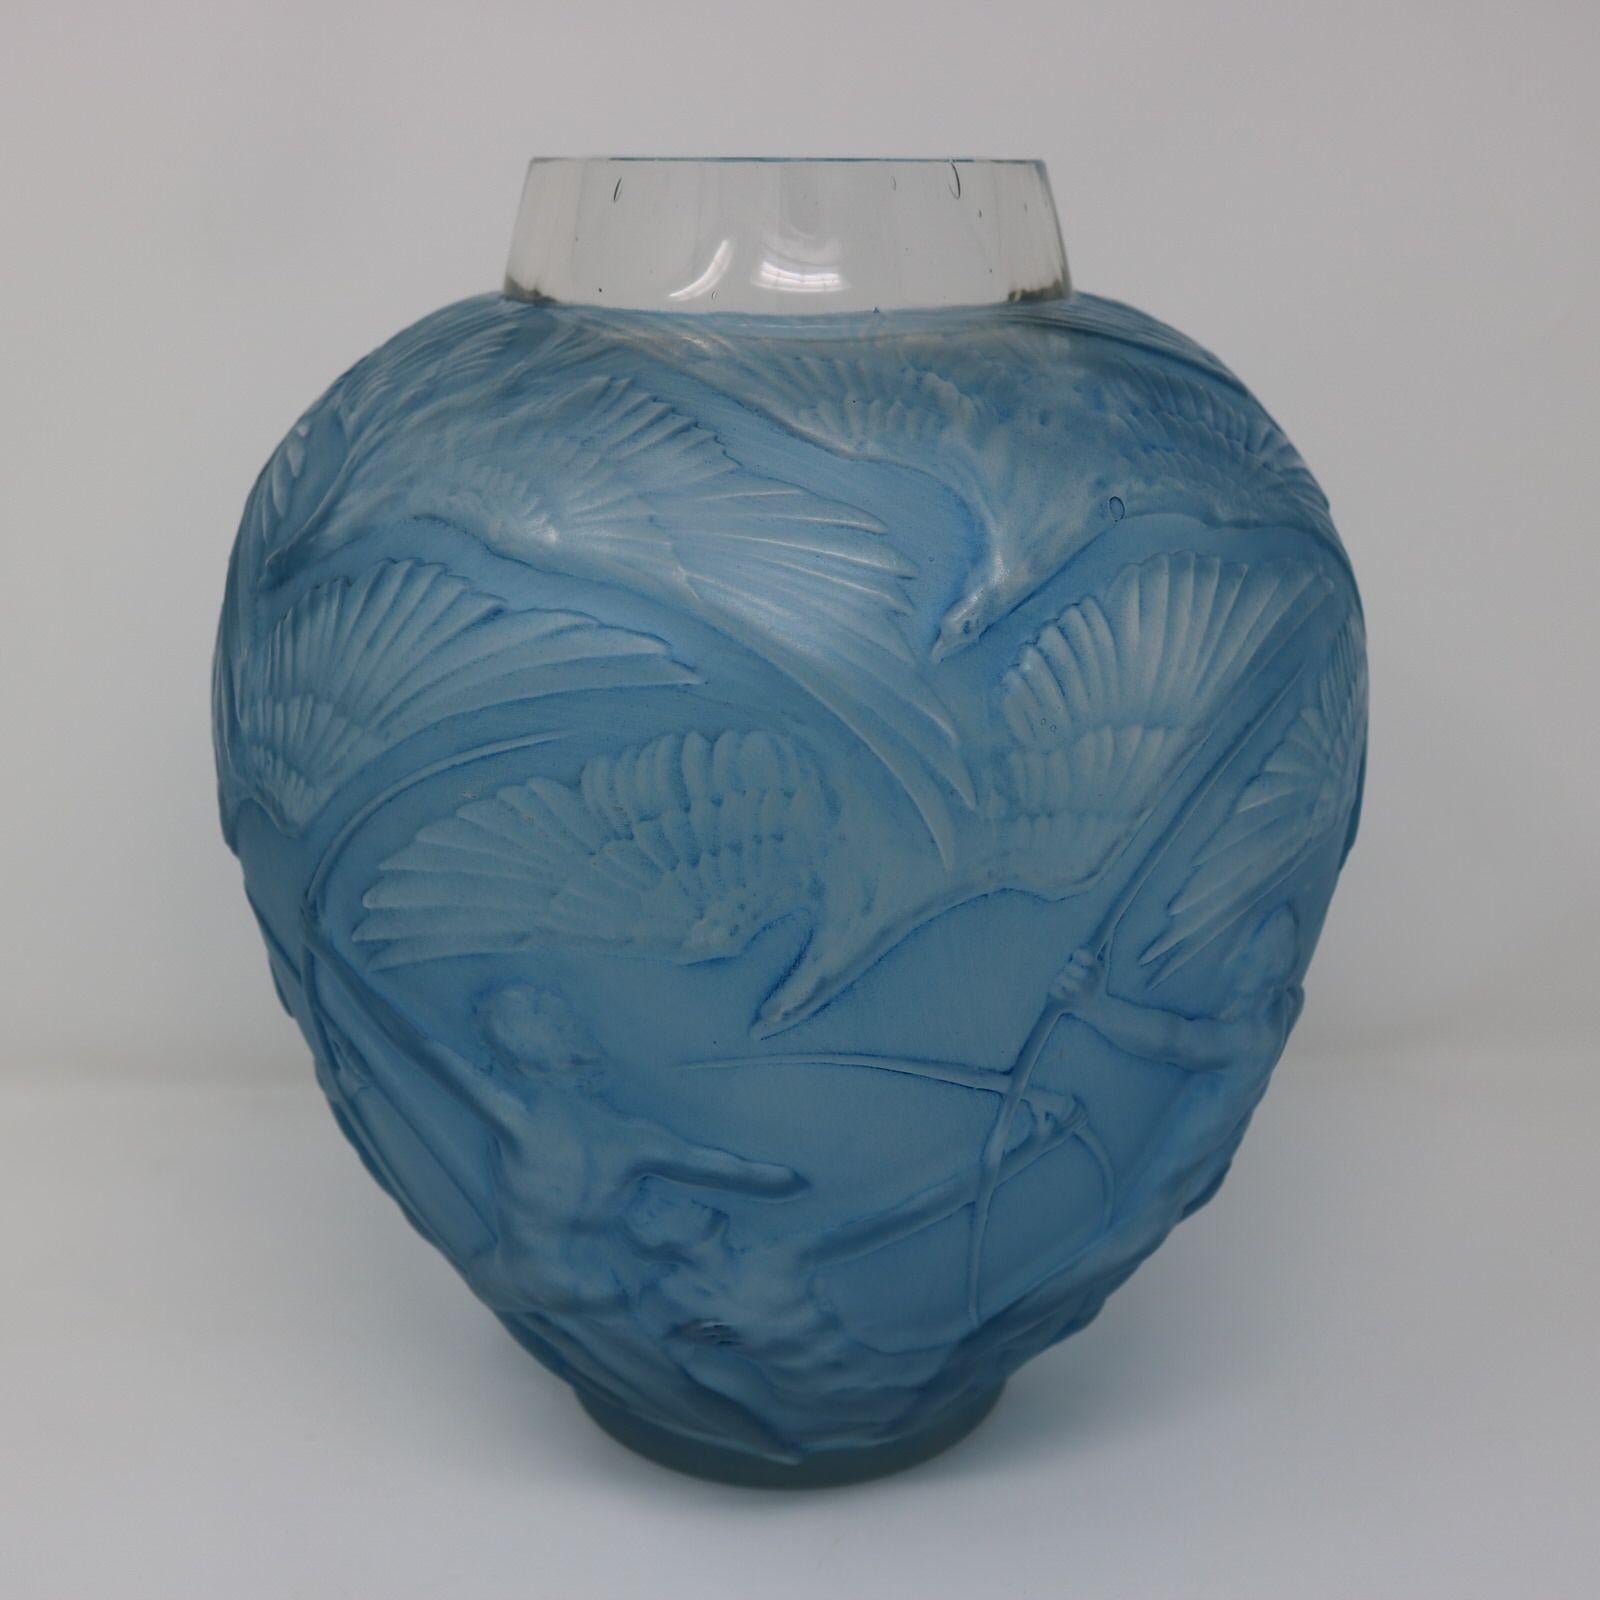 Early 20th Century Rene Lalique Glass Archers Vase, Blue Stained